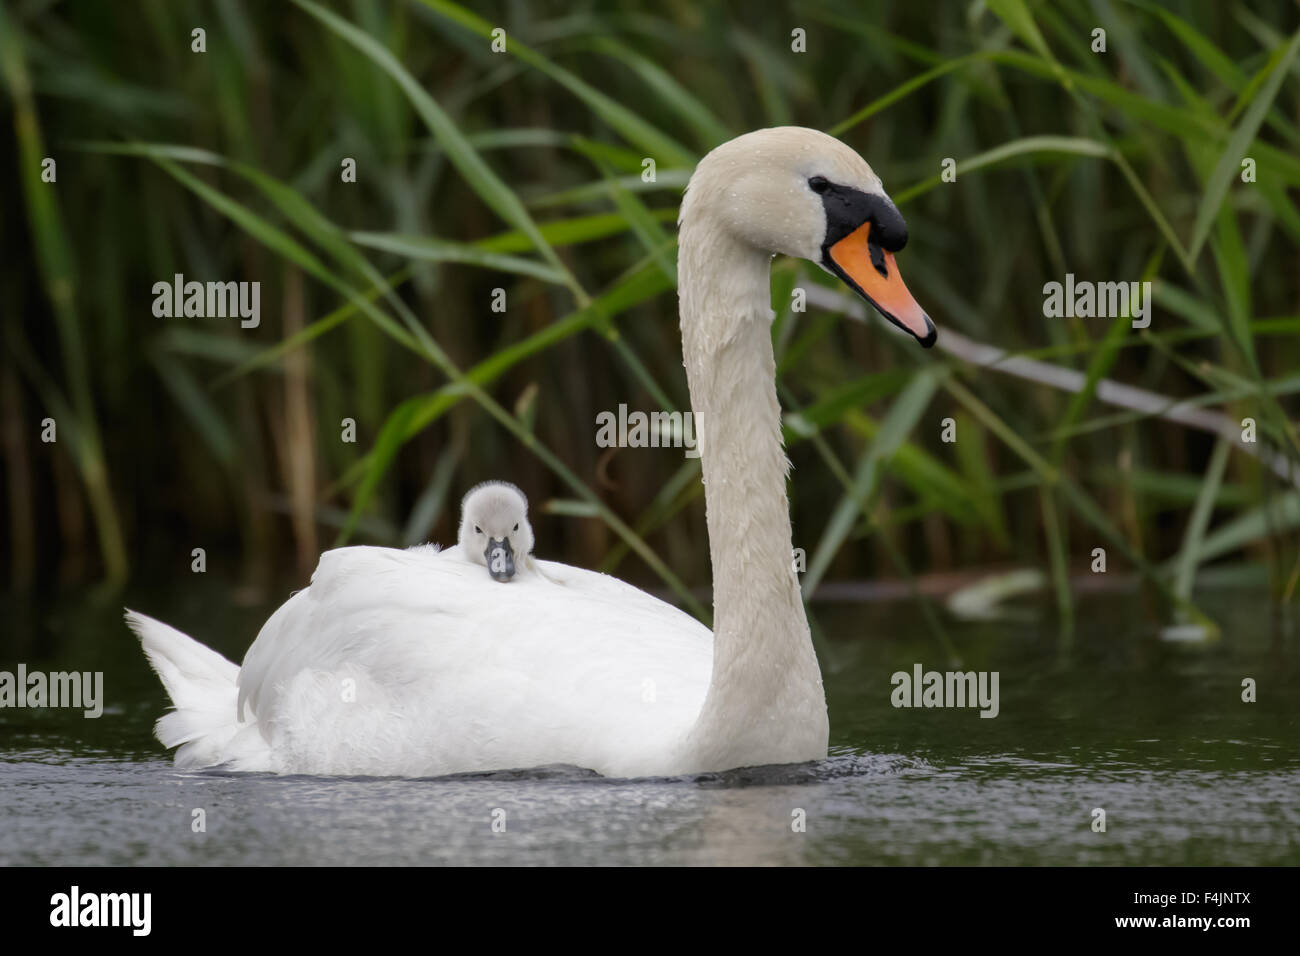 Adult Swan (Cygnus olor) carrying carries single baby cygnet on-board Stock Photo